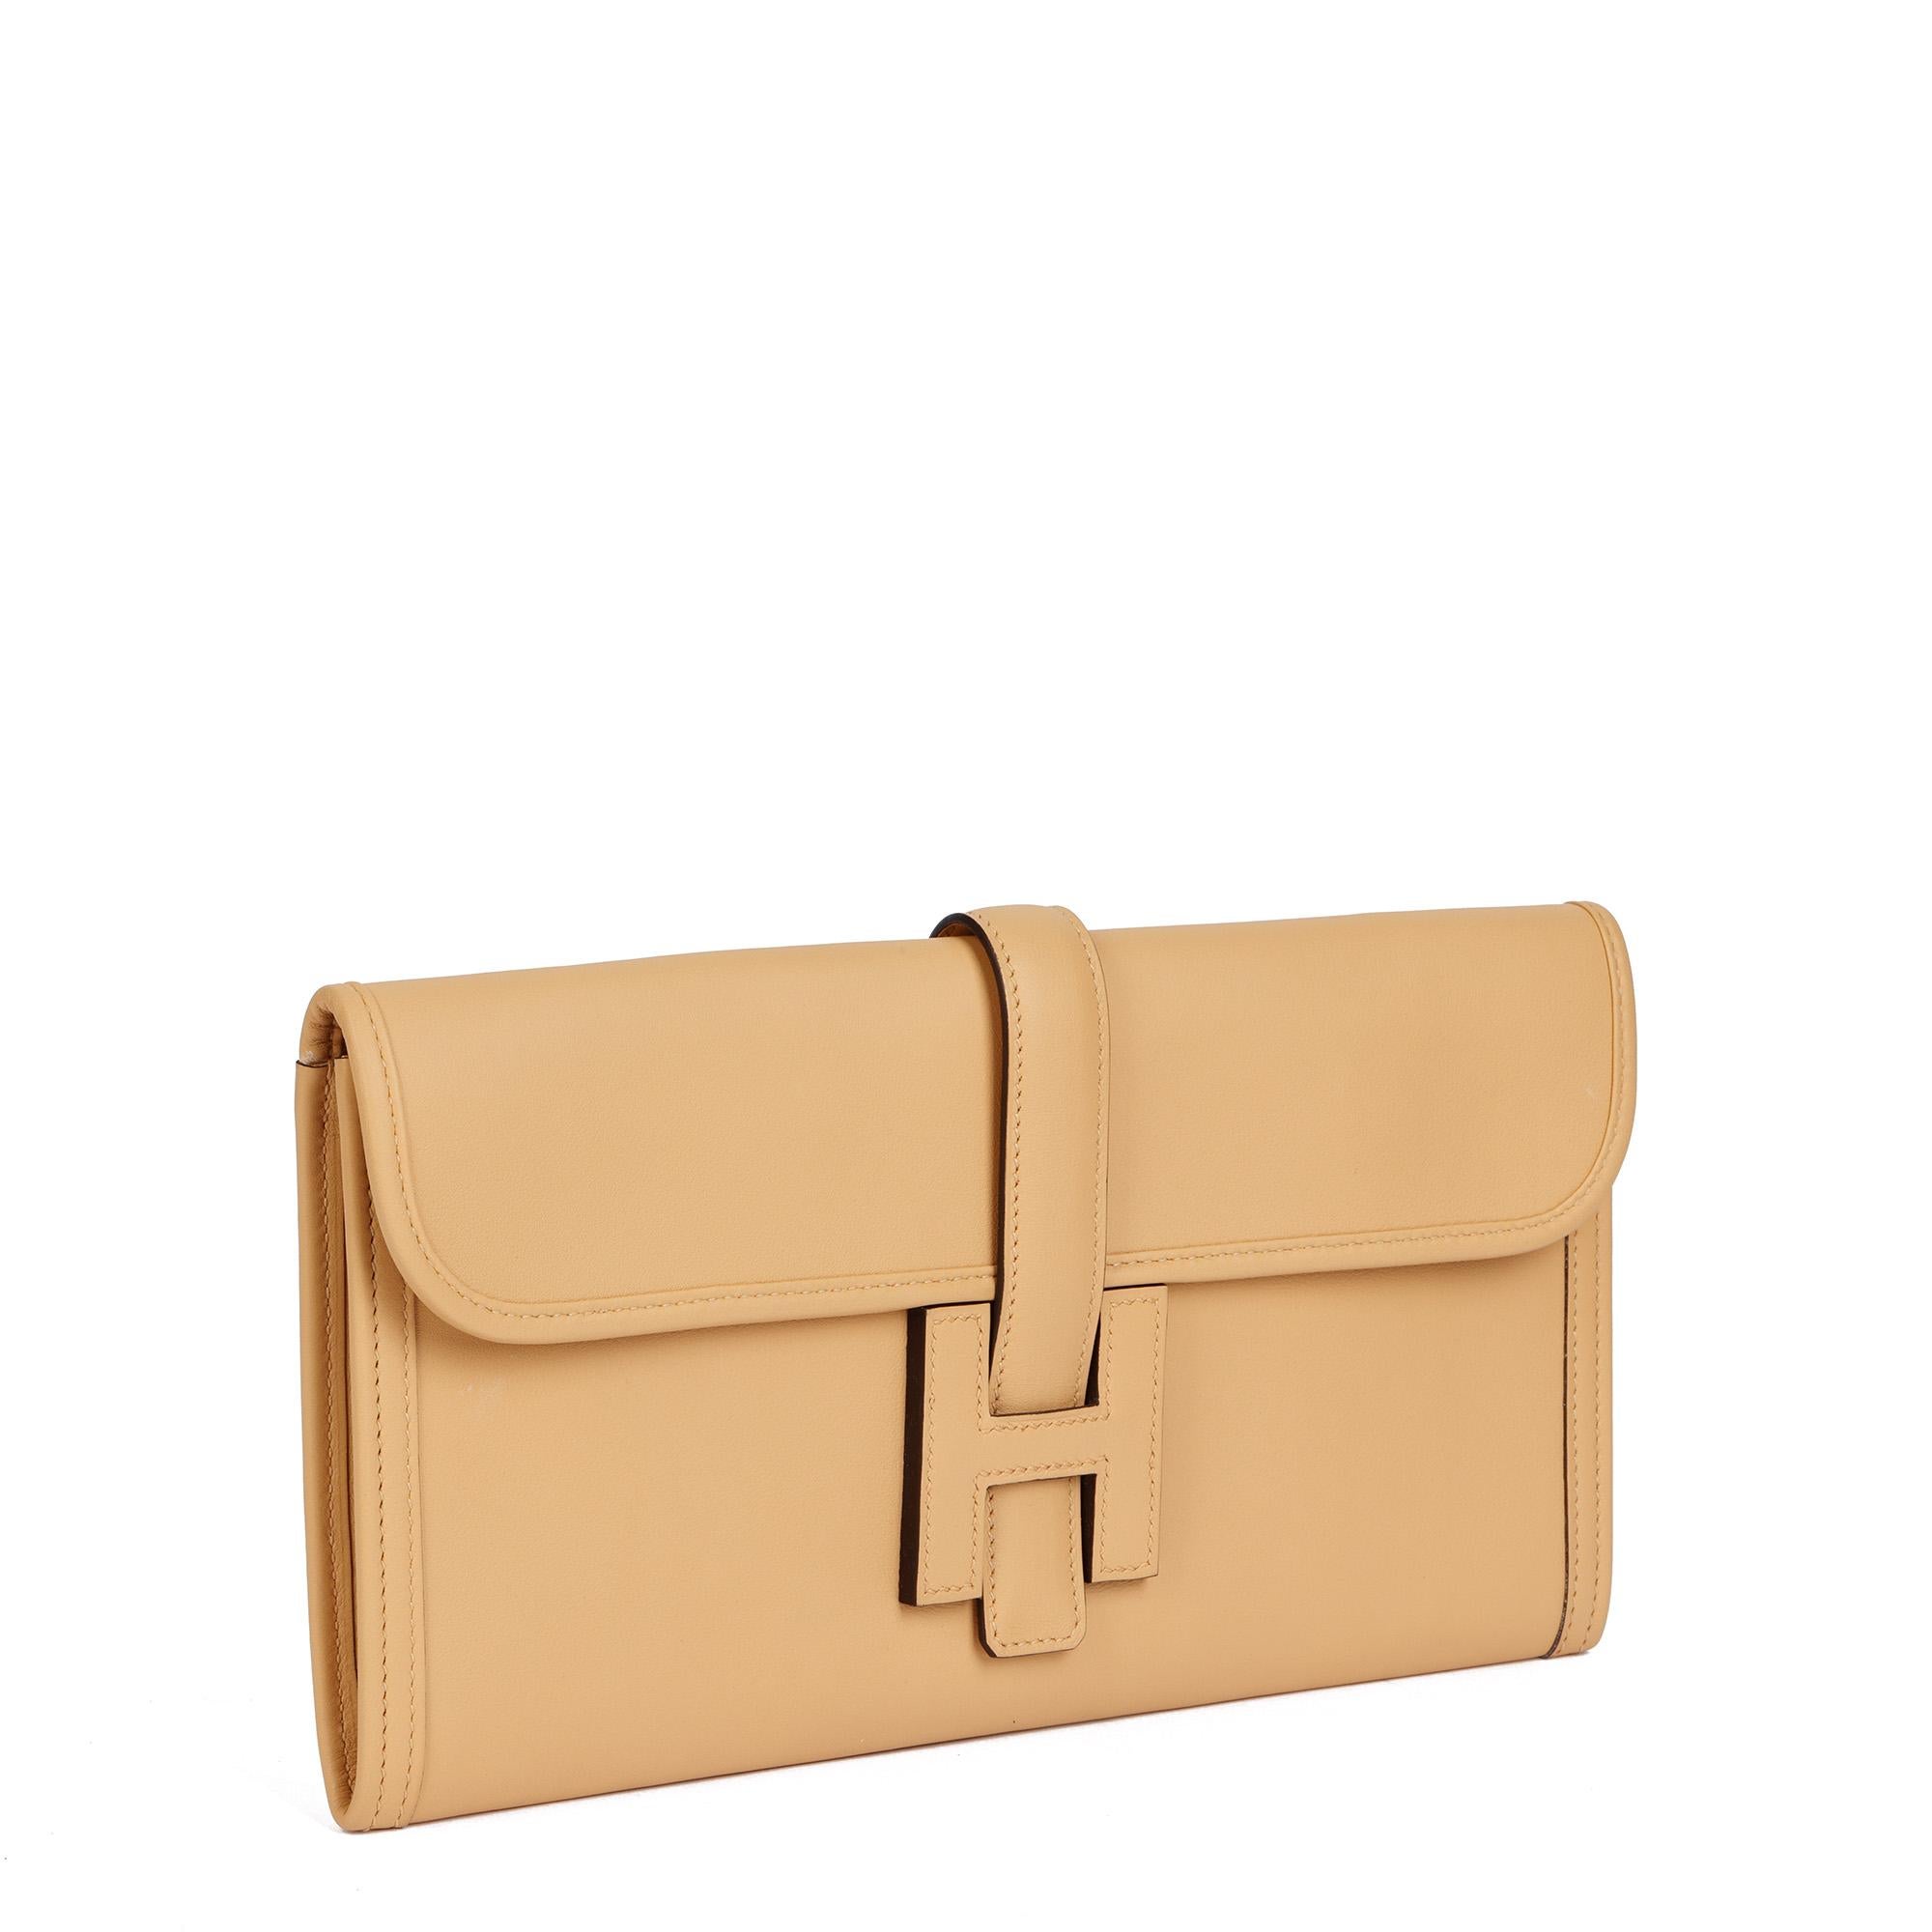 HERMÈS
Natural Sable Swift Leather Jige Elan 29

Xupes Reference: HB4716
Serial Number: X
Age (Circa): 2016
Accompanied By: Hermès Dust Bag
Authenticity Details: Date Stamp (Made in France)
Gender: Ladies
Type: Clutch

Colour: Natural